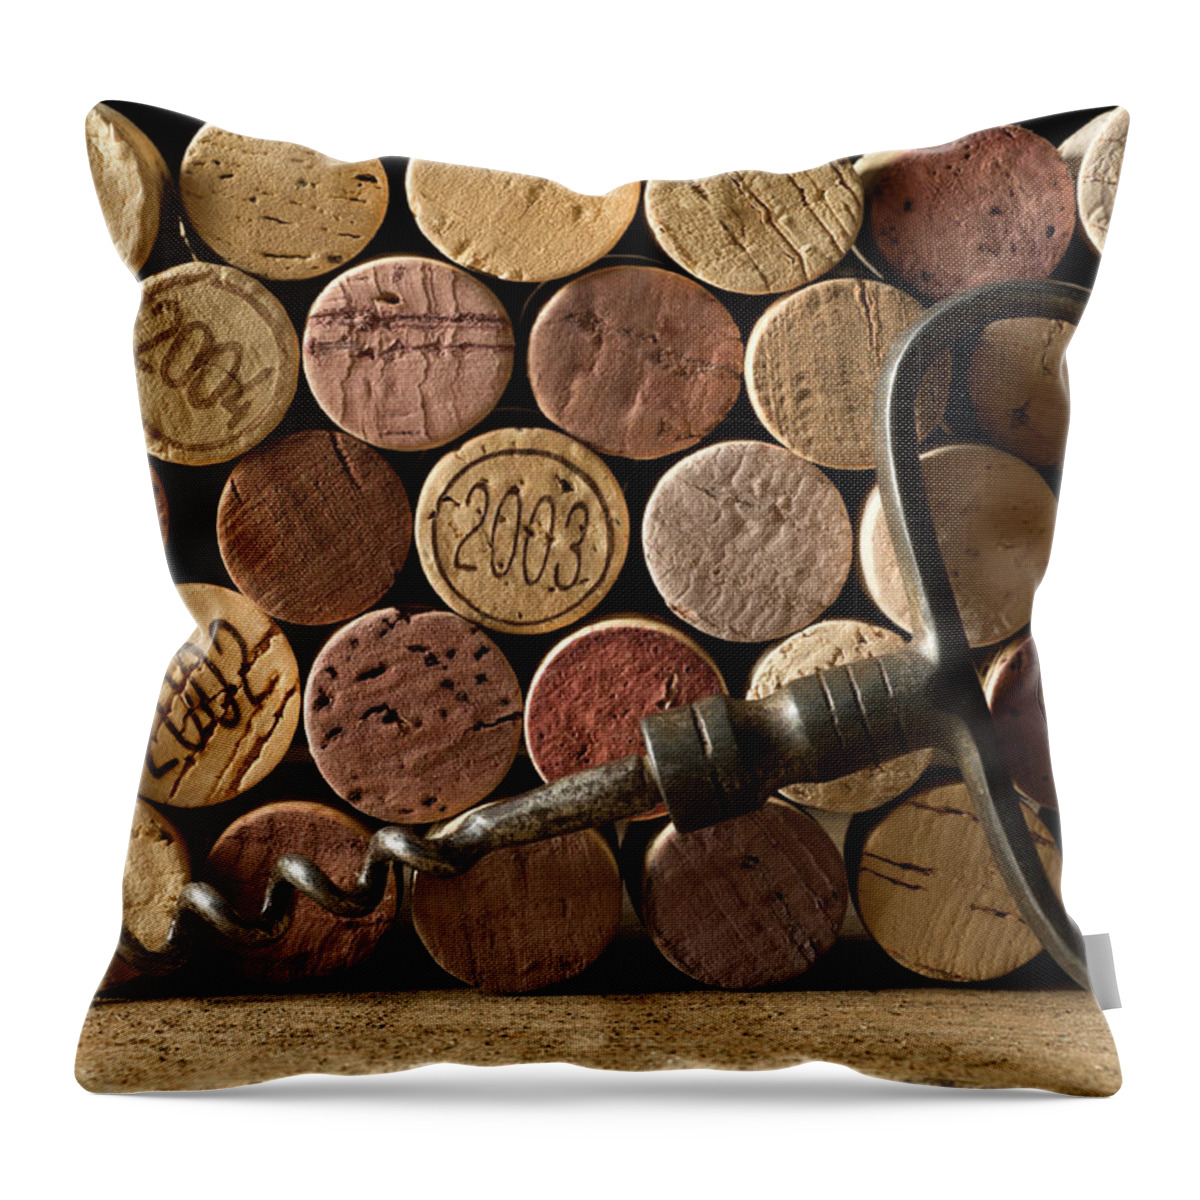 Corkscrew Throw Pillow featuring the photograph Corks And Corkscrew by Markswallow